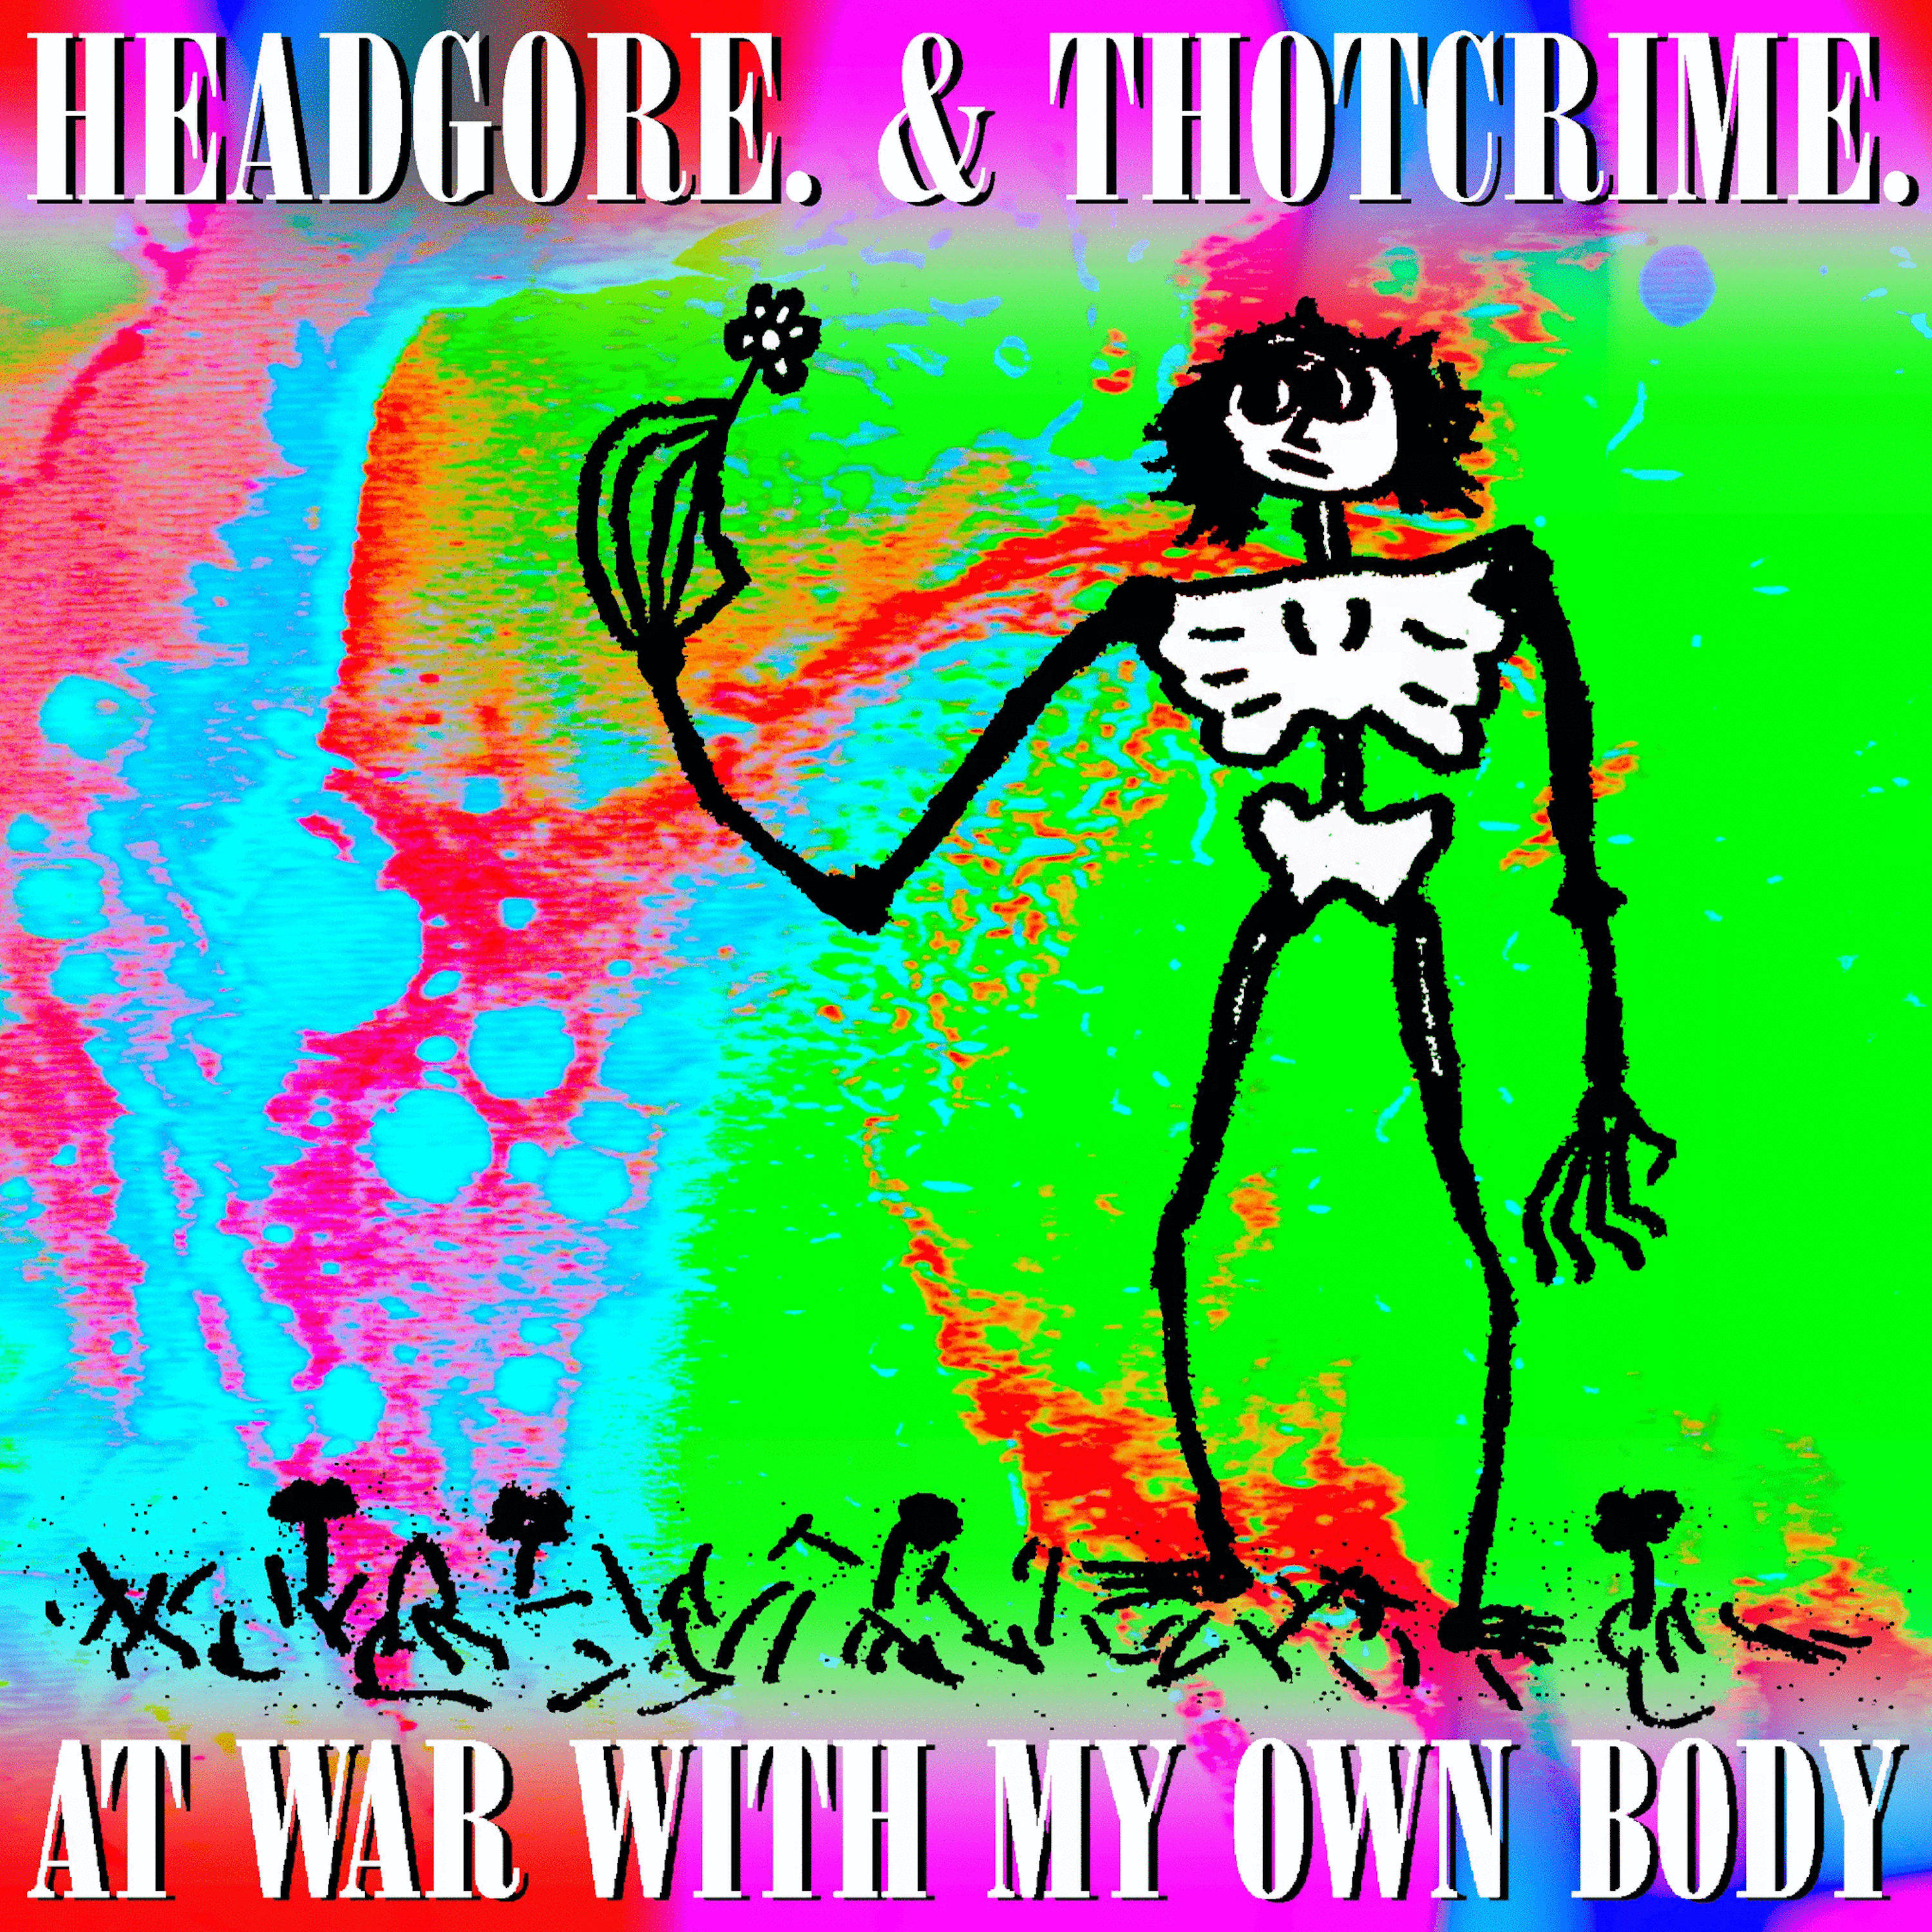 Album artwork for at-war-with-my-own-body